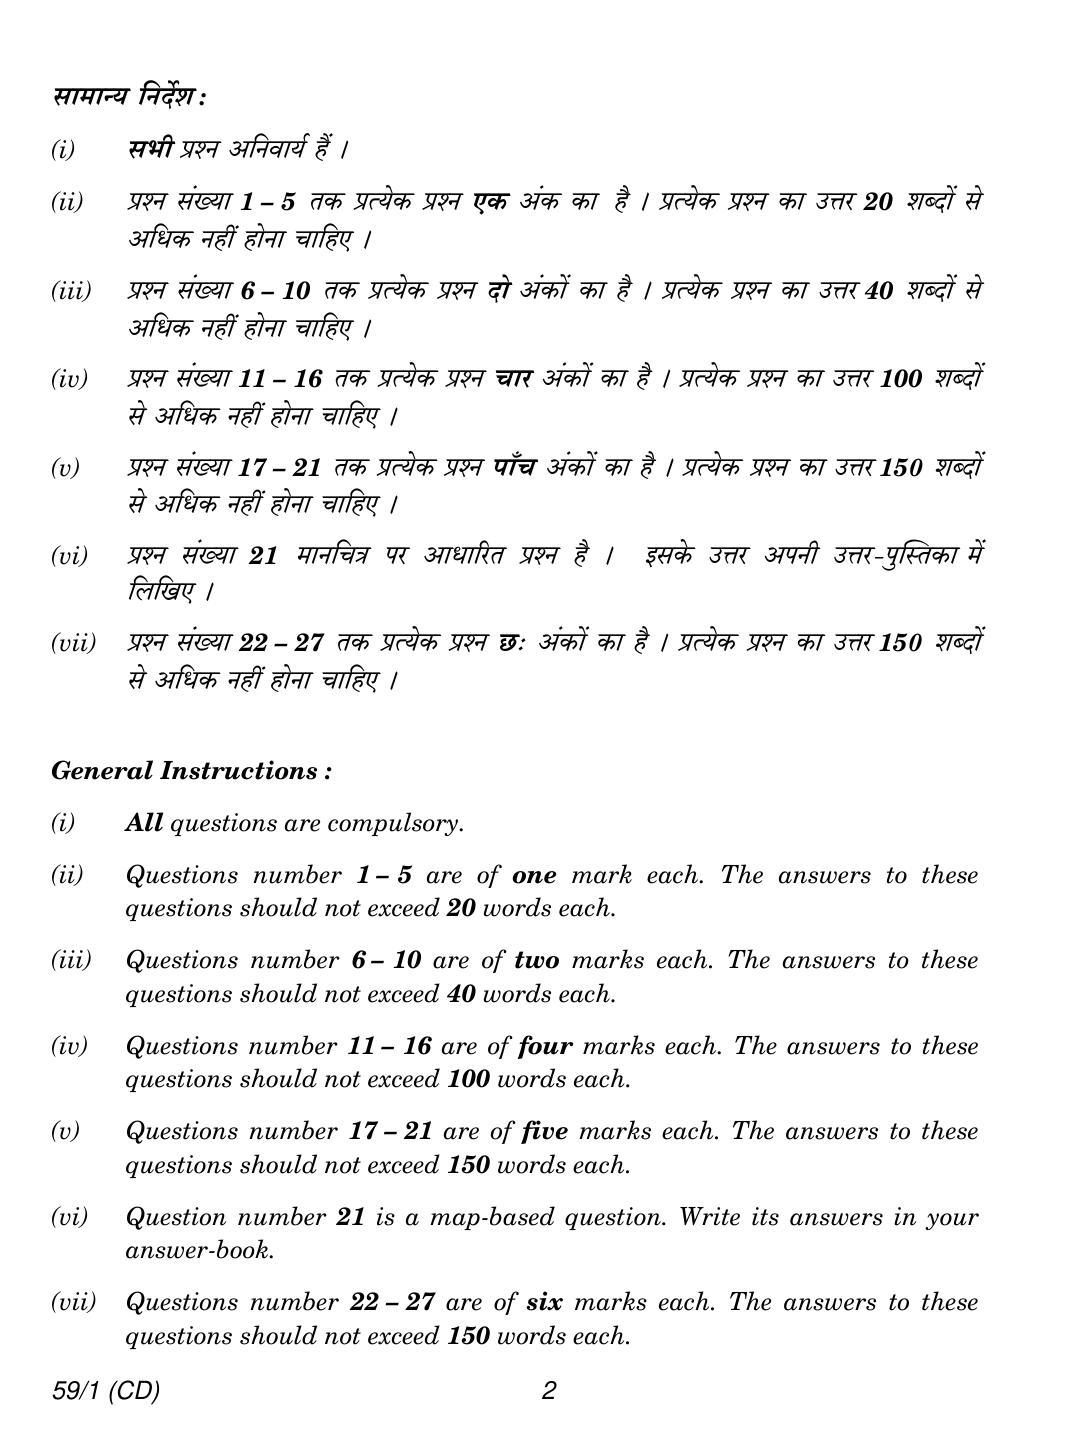 CBSE Class 12 59-1 POLITICAL SCIENCE CD 2018 Question Paper - Page 2